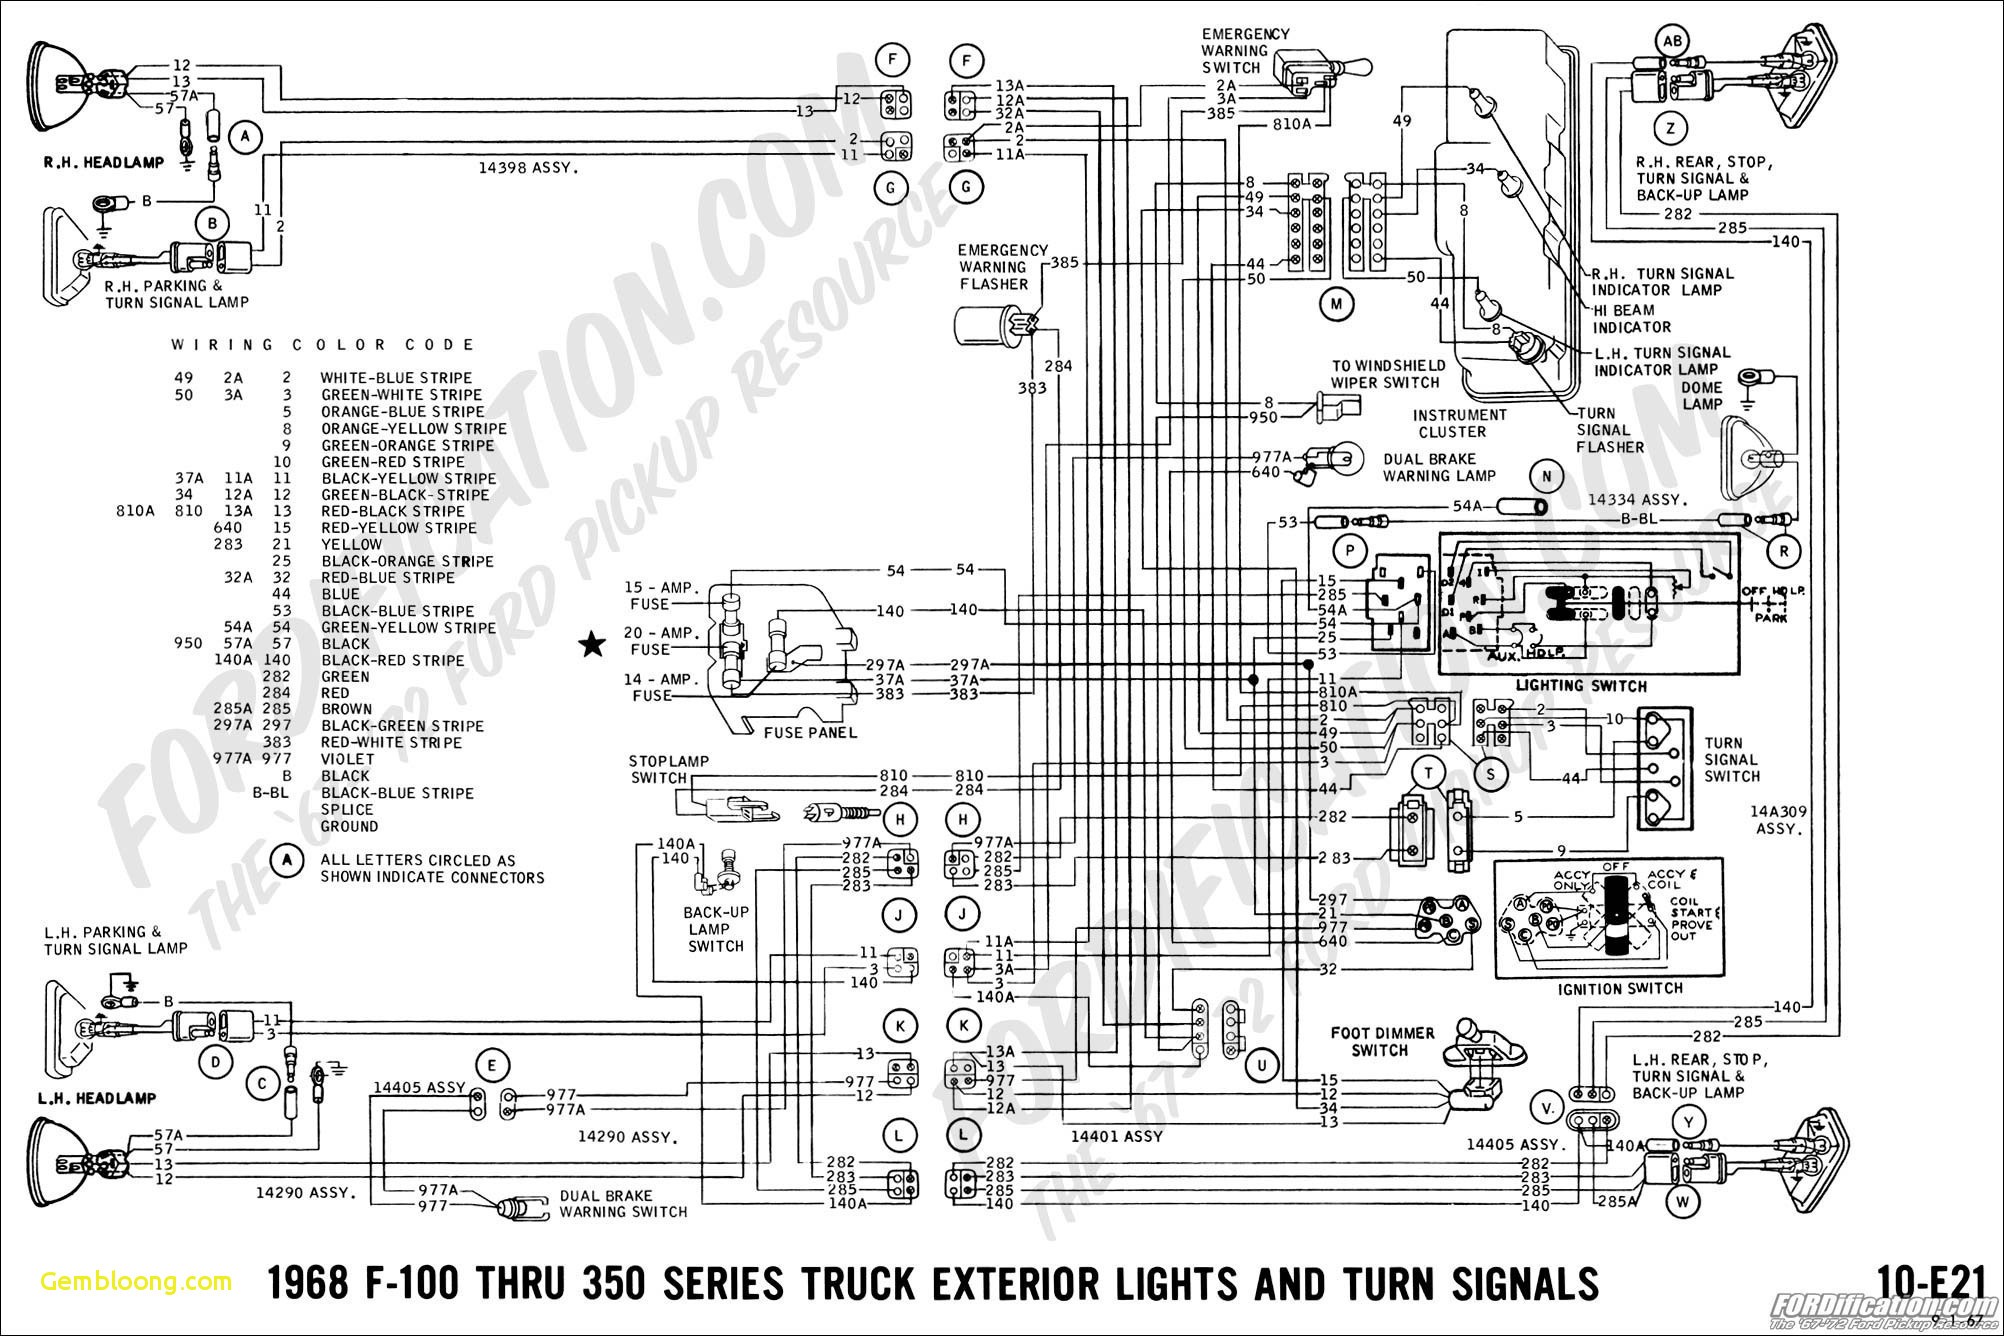 2000 ford F150 Parts Diagram ford F150 Wiring Diagrams Wiring Diagram Datasource Of 2000 ford F150 Parts Diagram